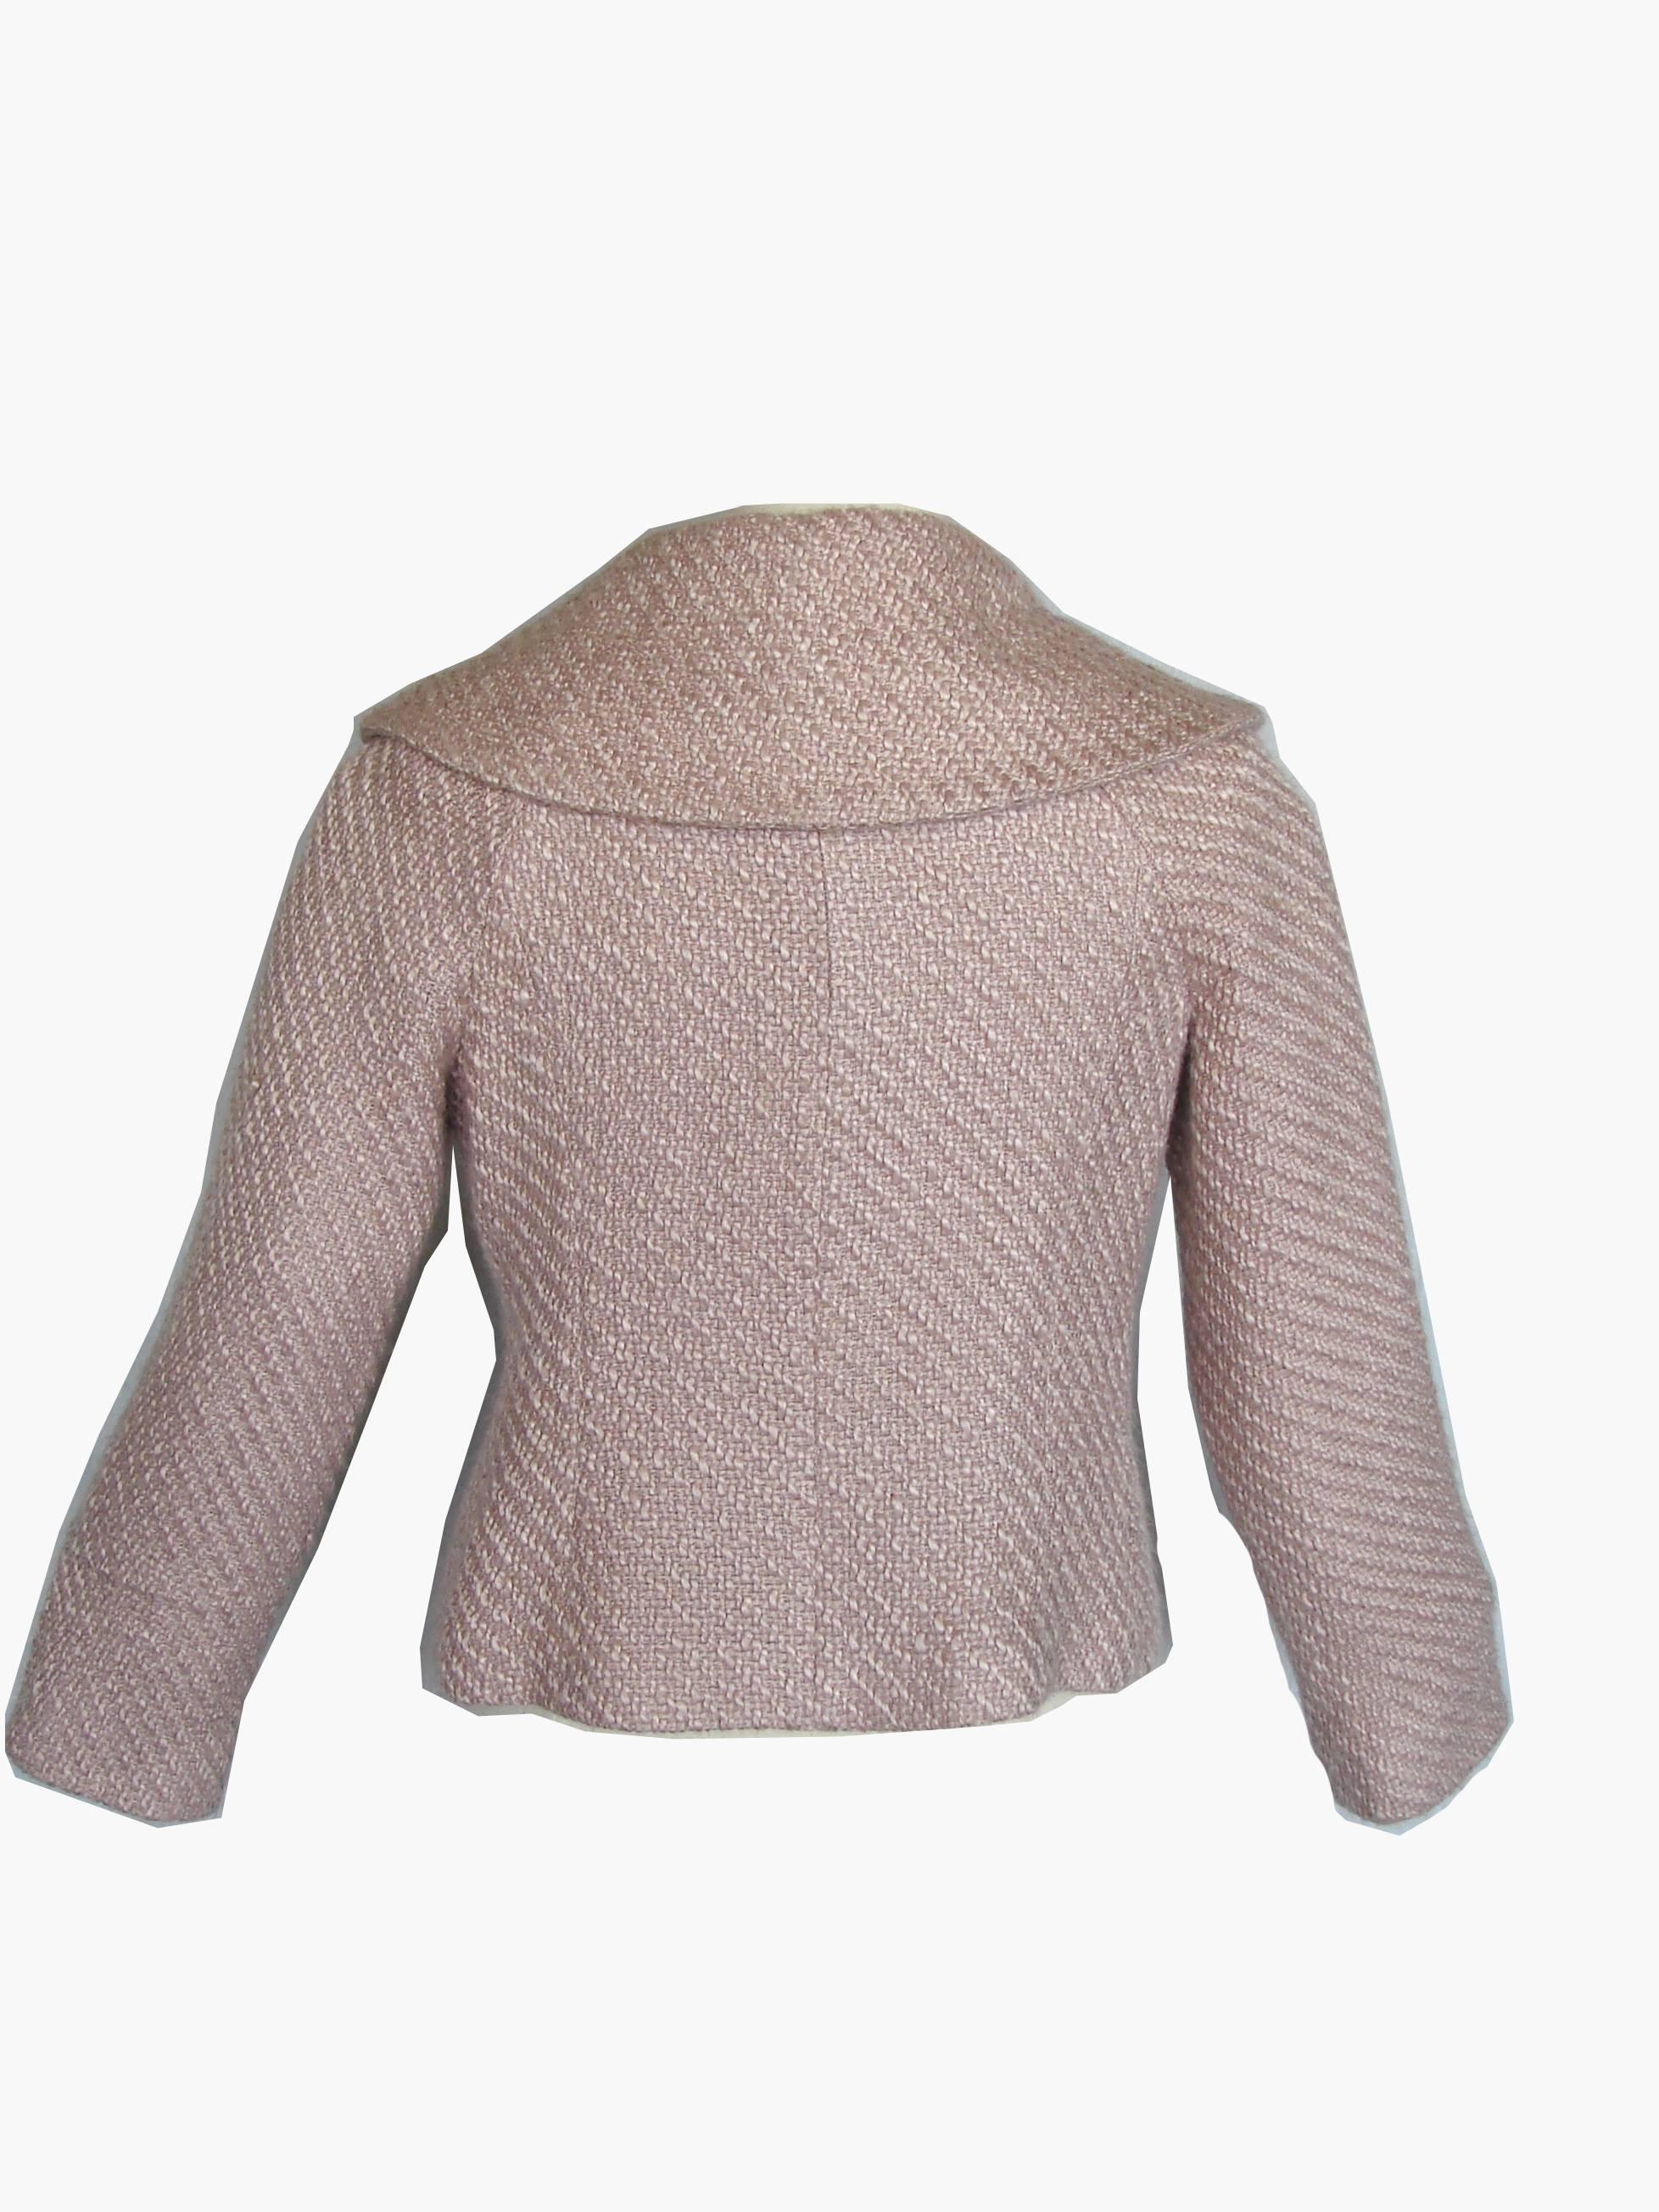 Women's Pierre Cardin Pale Pink Knit Jacket with Shawl Collar 1980s Size 8